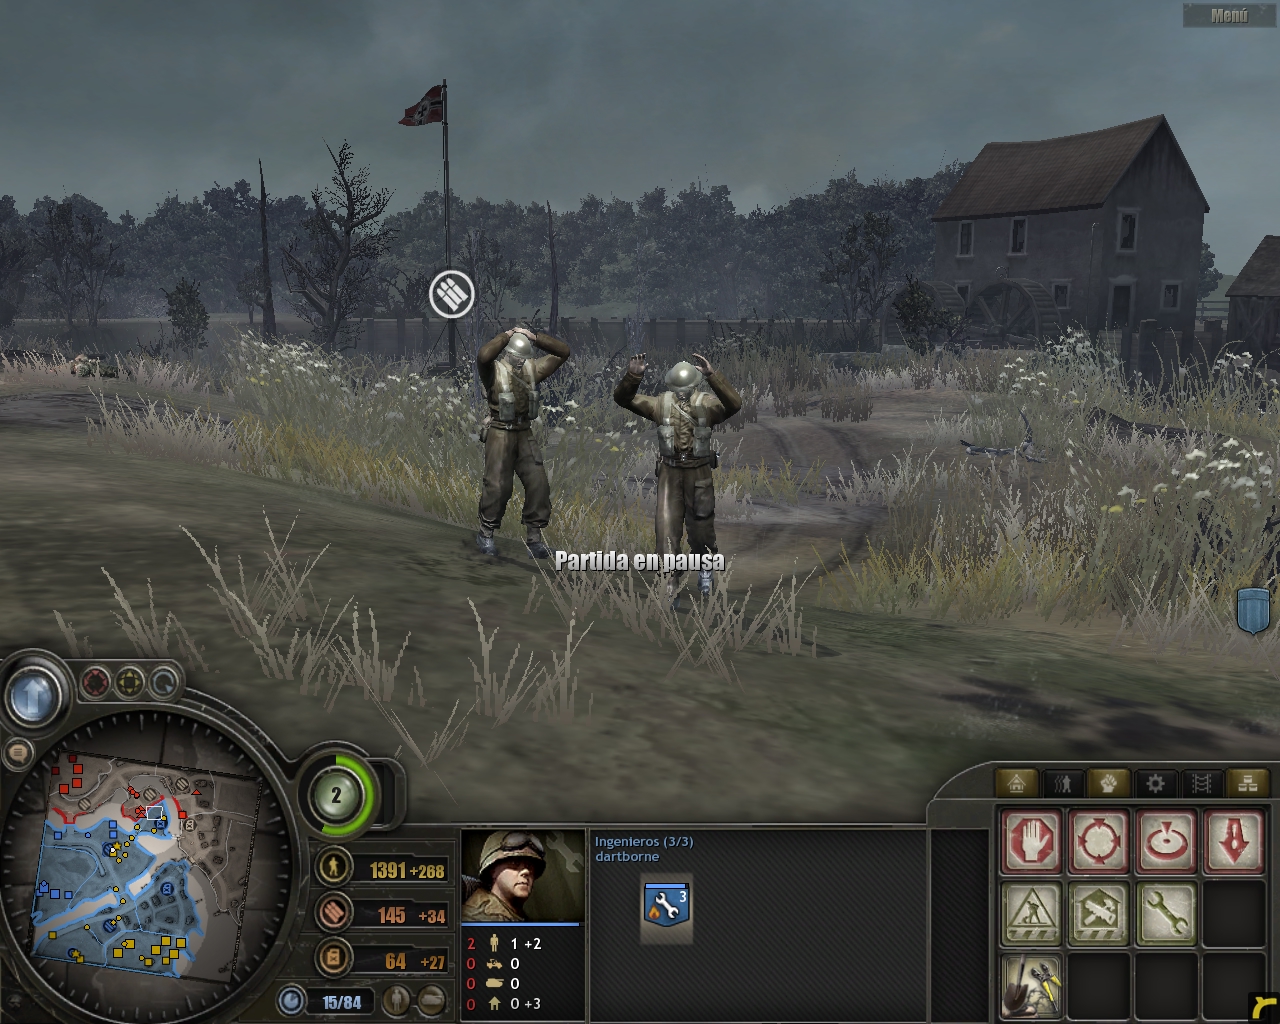 surrendered troops image - Europe at War Mod for Company of Heroes 